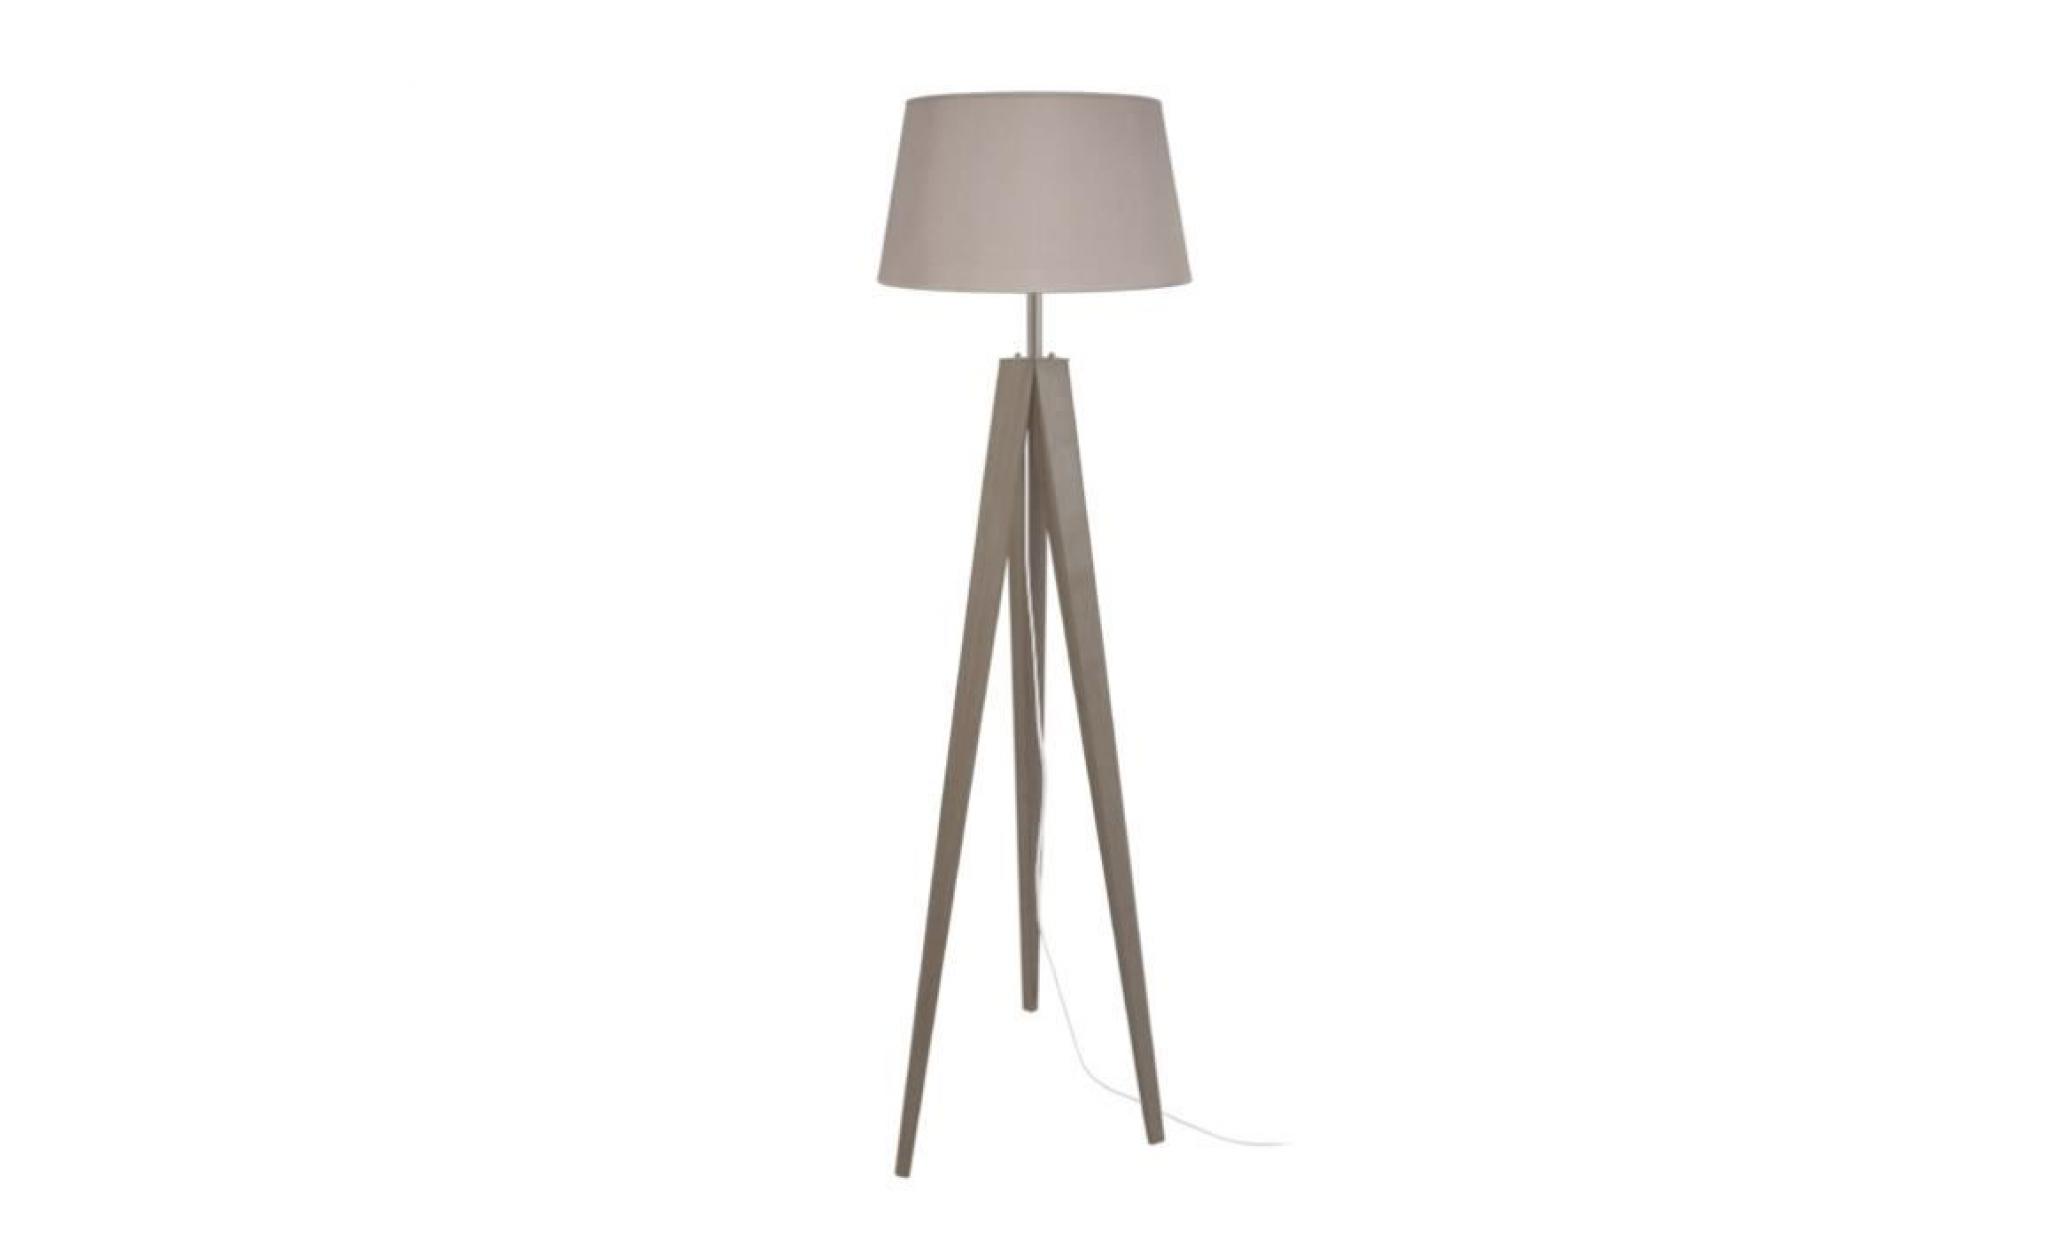 lampadaires idun 2   lampadaire tosel taupe dimensions:40  x 155 cmdouille:       1 x e27puissance:1 x 40 w